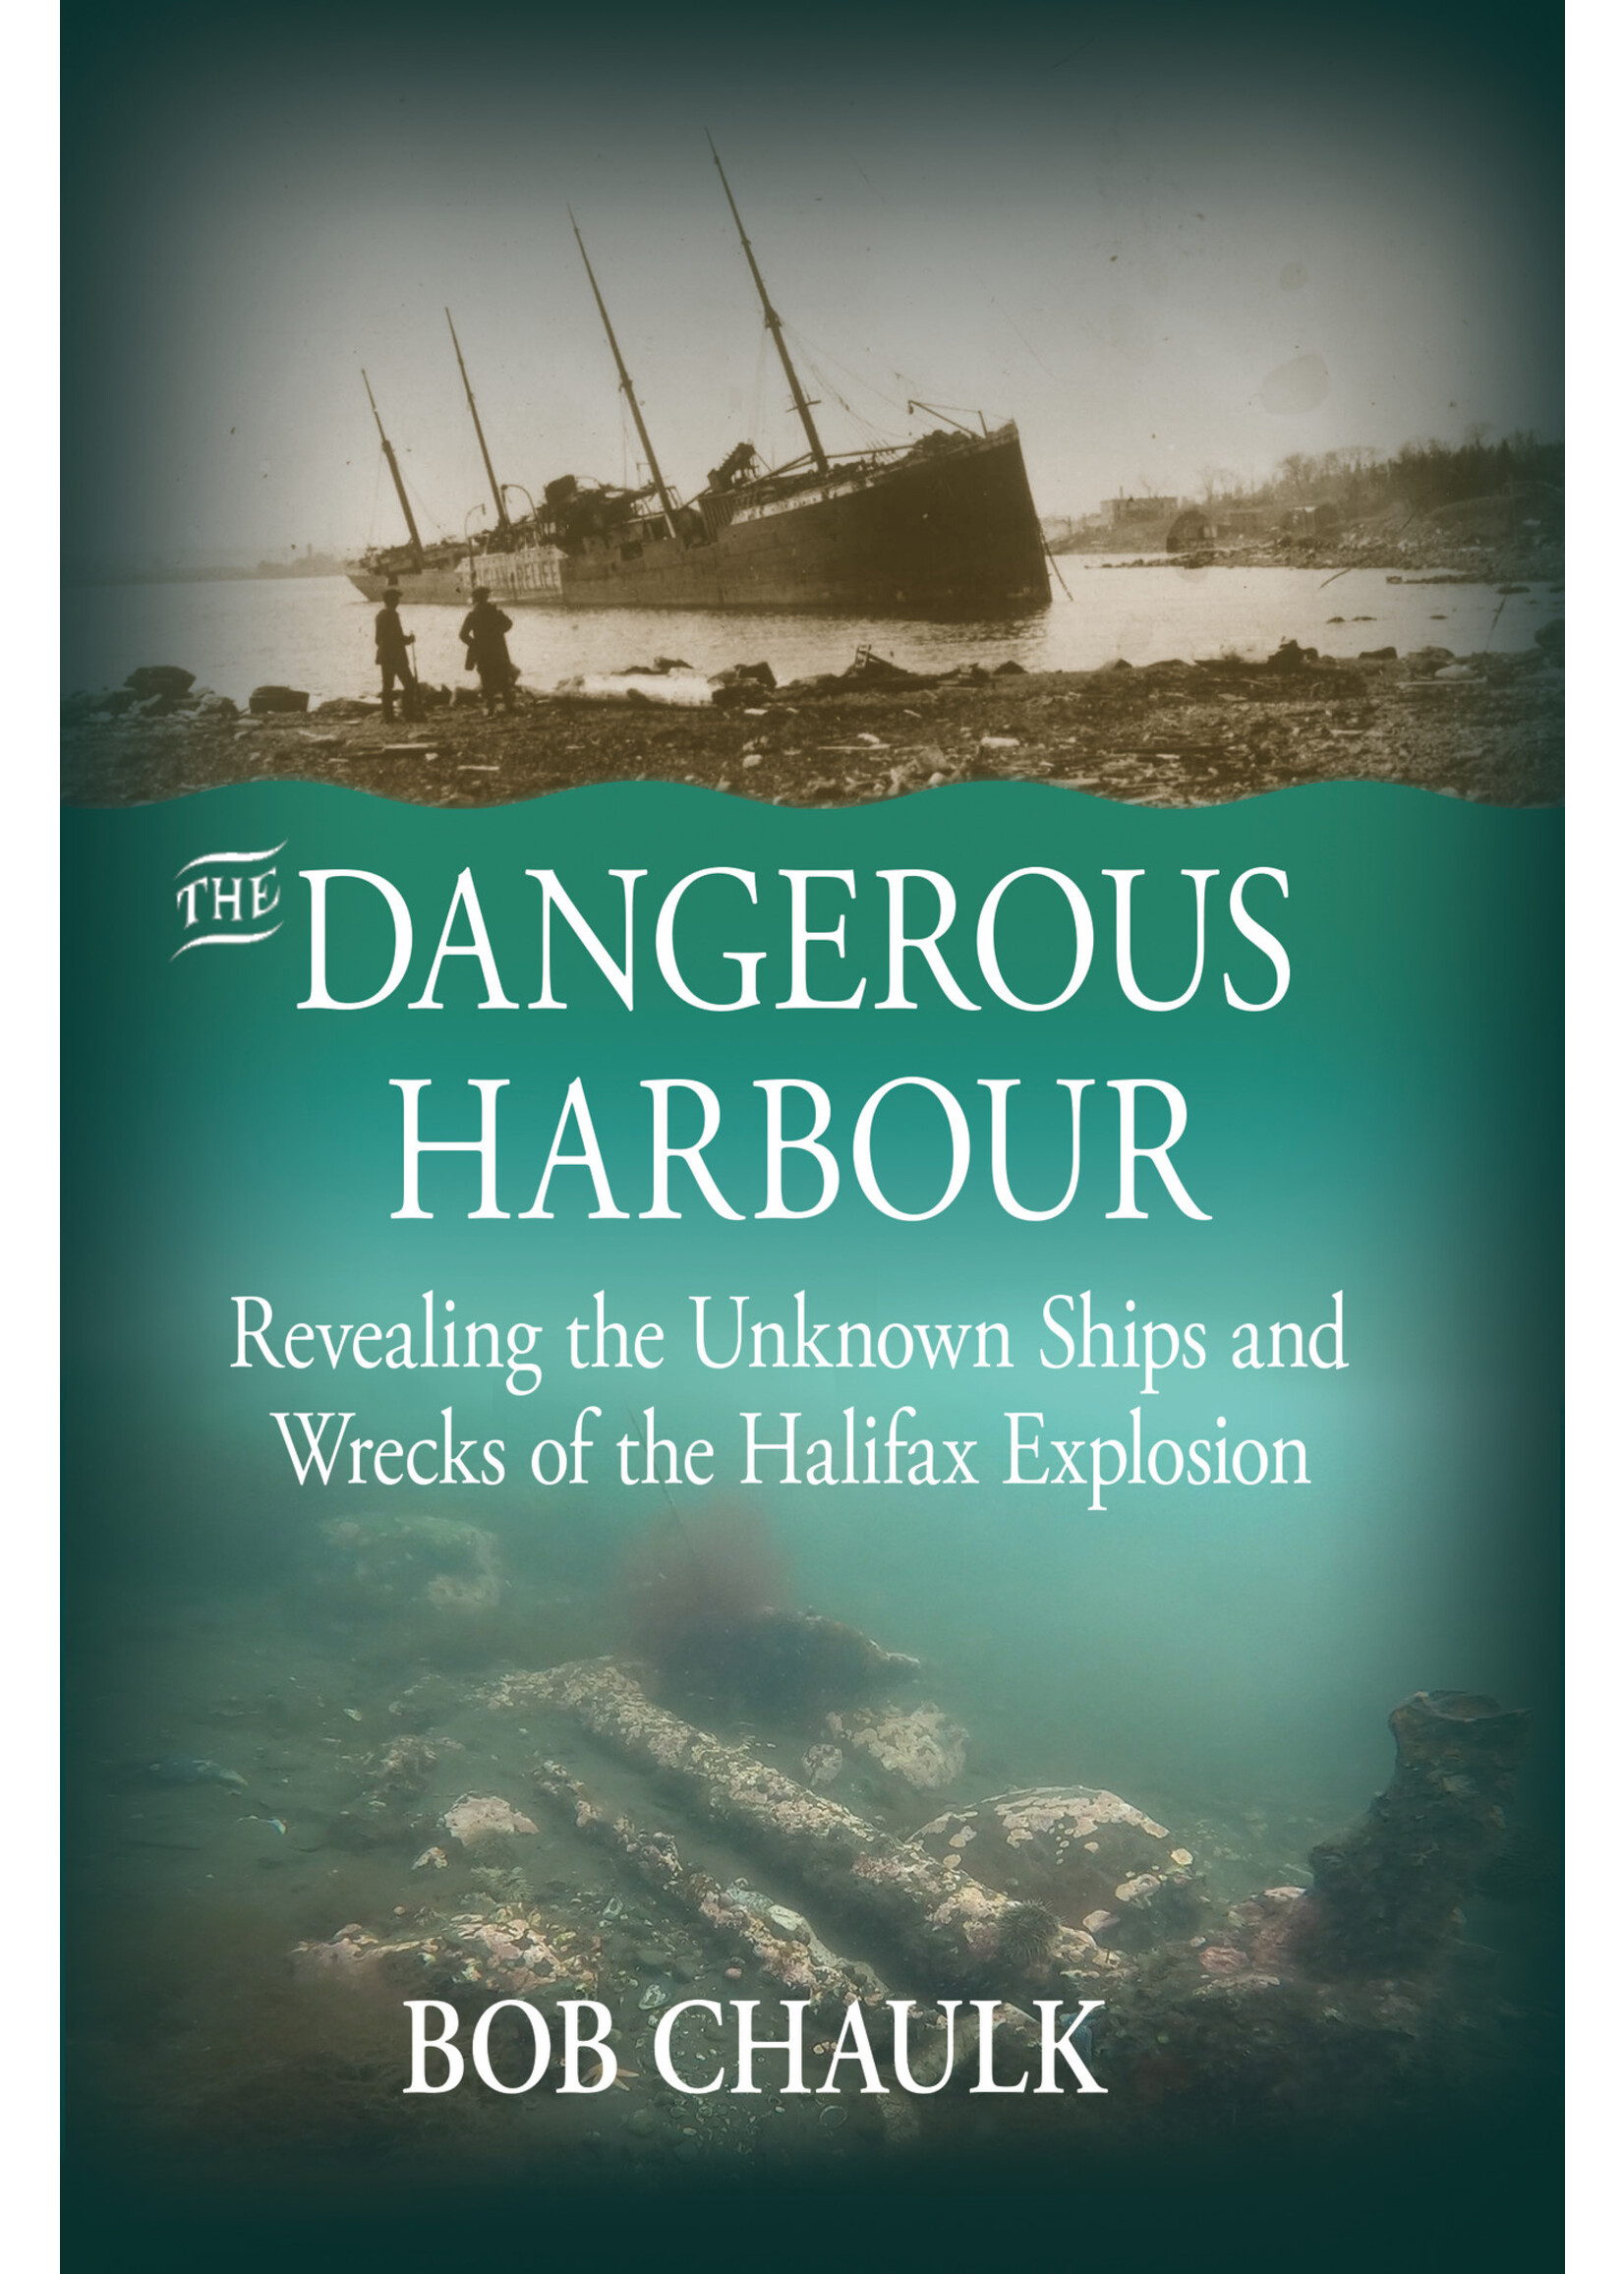 The Dangerous Harbour: Revealing the Unknown Ships and Wrecks of the Halifax Explosion by Bob Chaulk